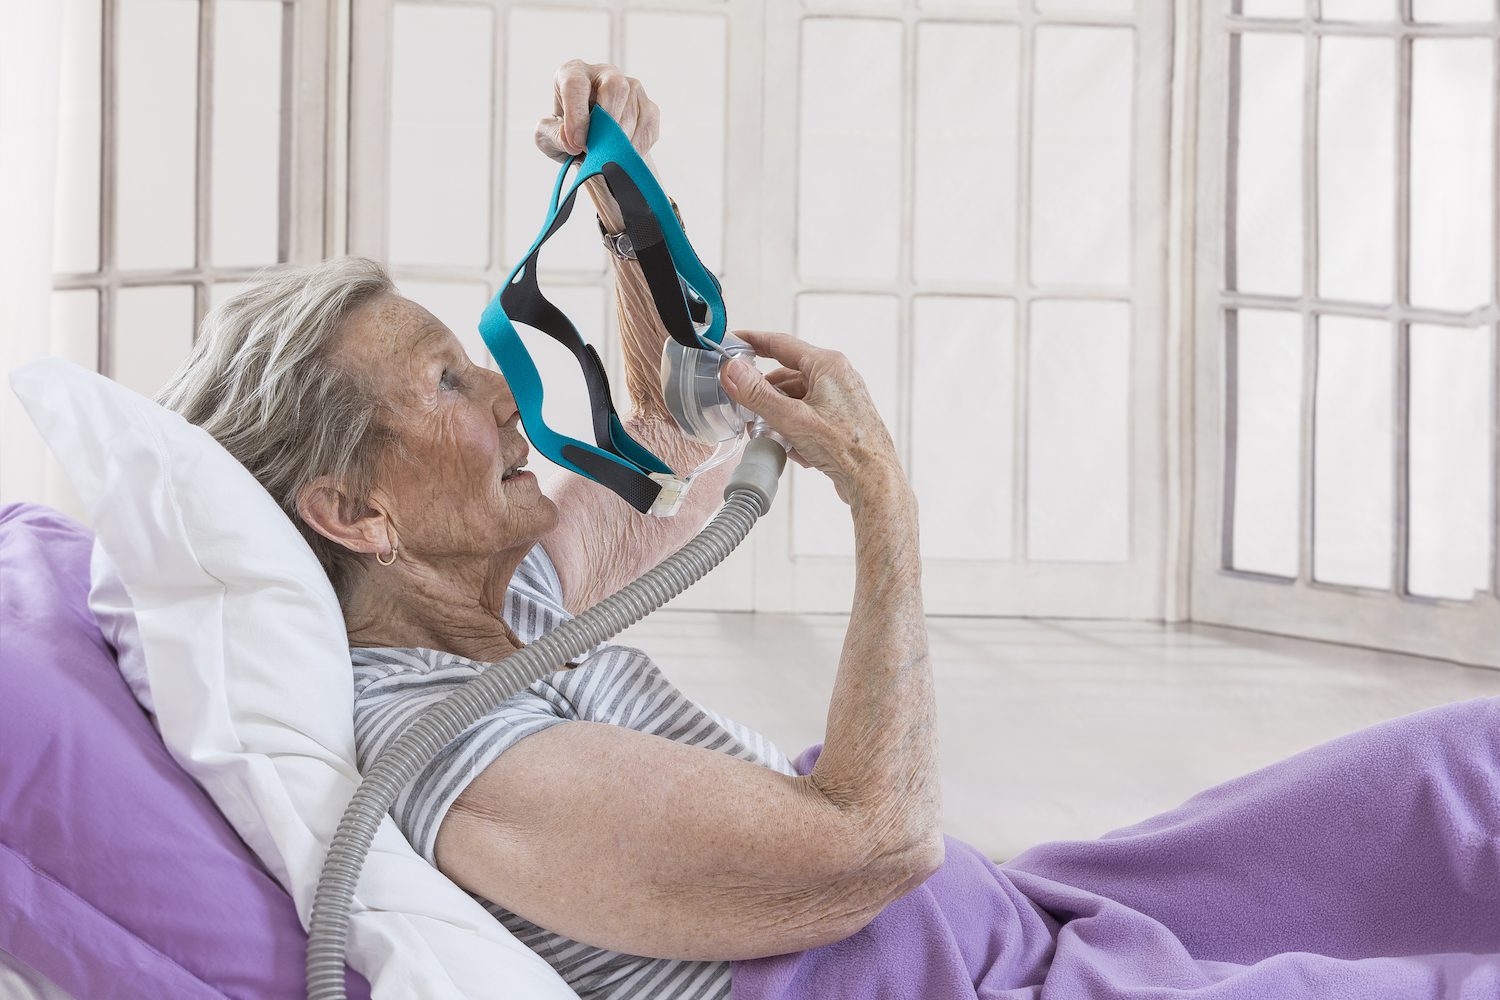 Woman using her CPAP machine in bed.